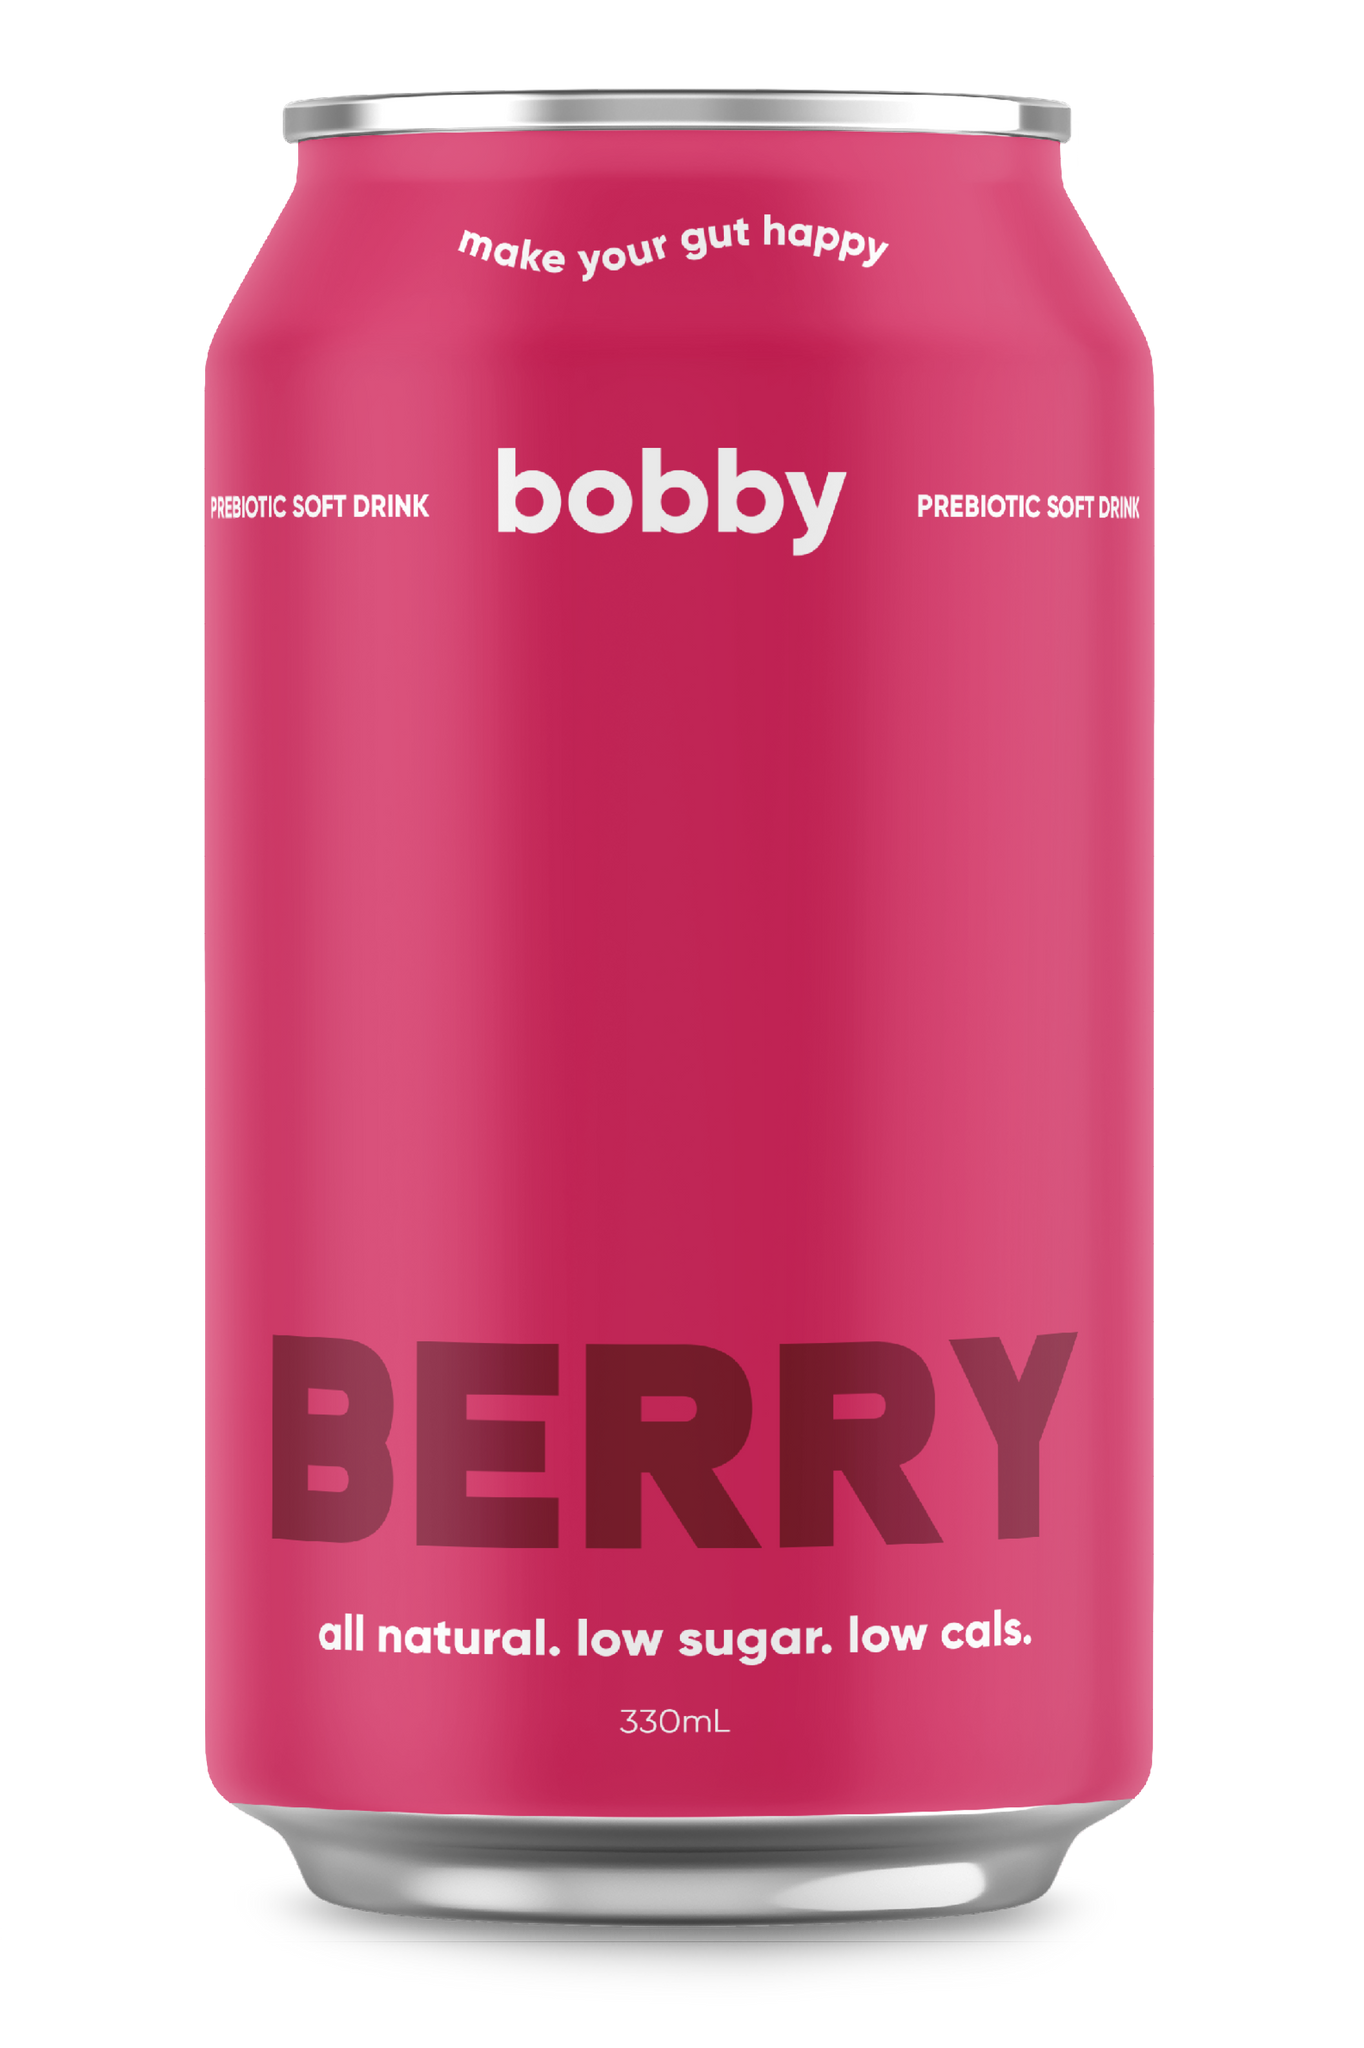 refreshing berry raspberry flavoured prebiotic soda, low in calories, low sugar and all natural 